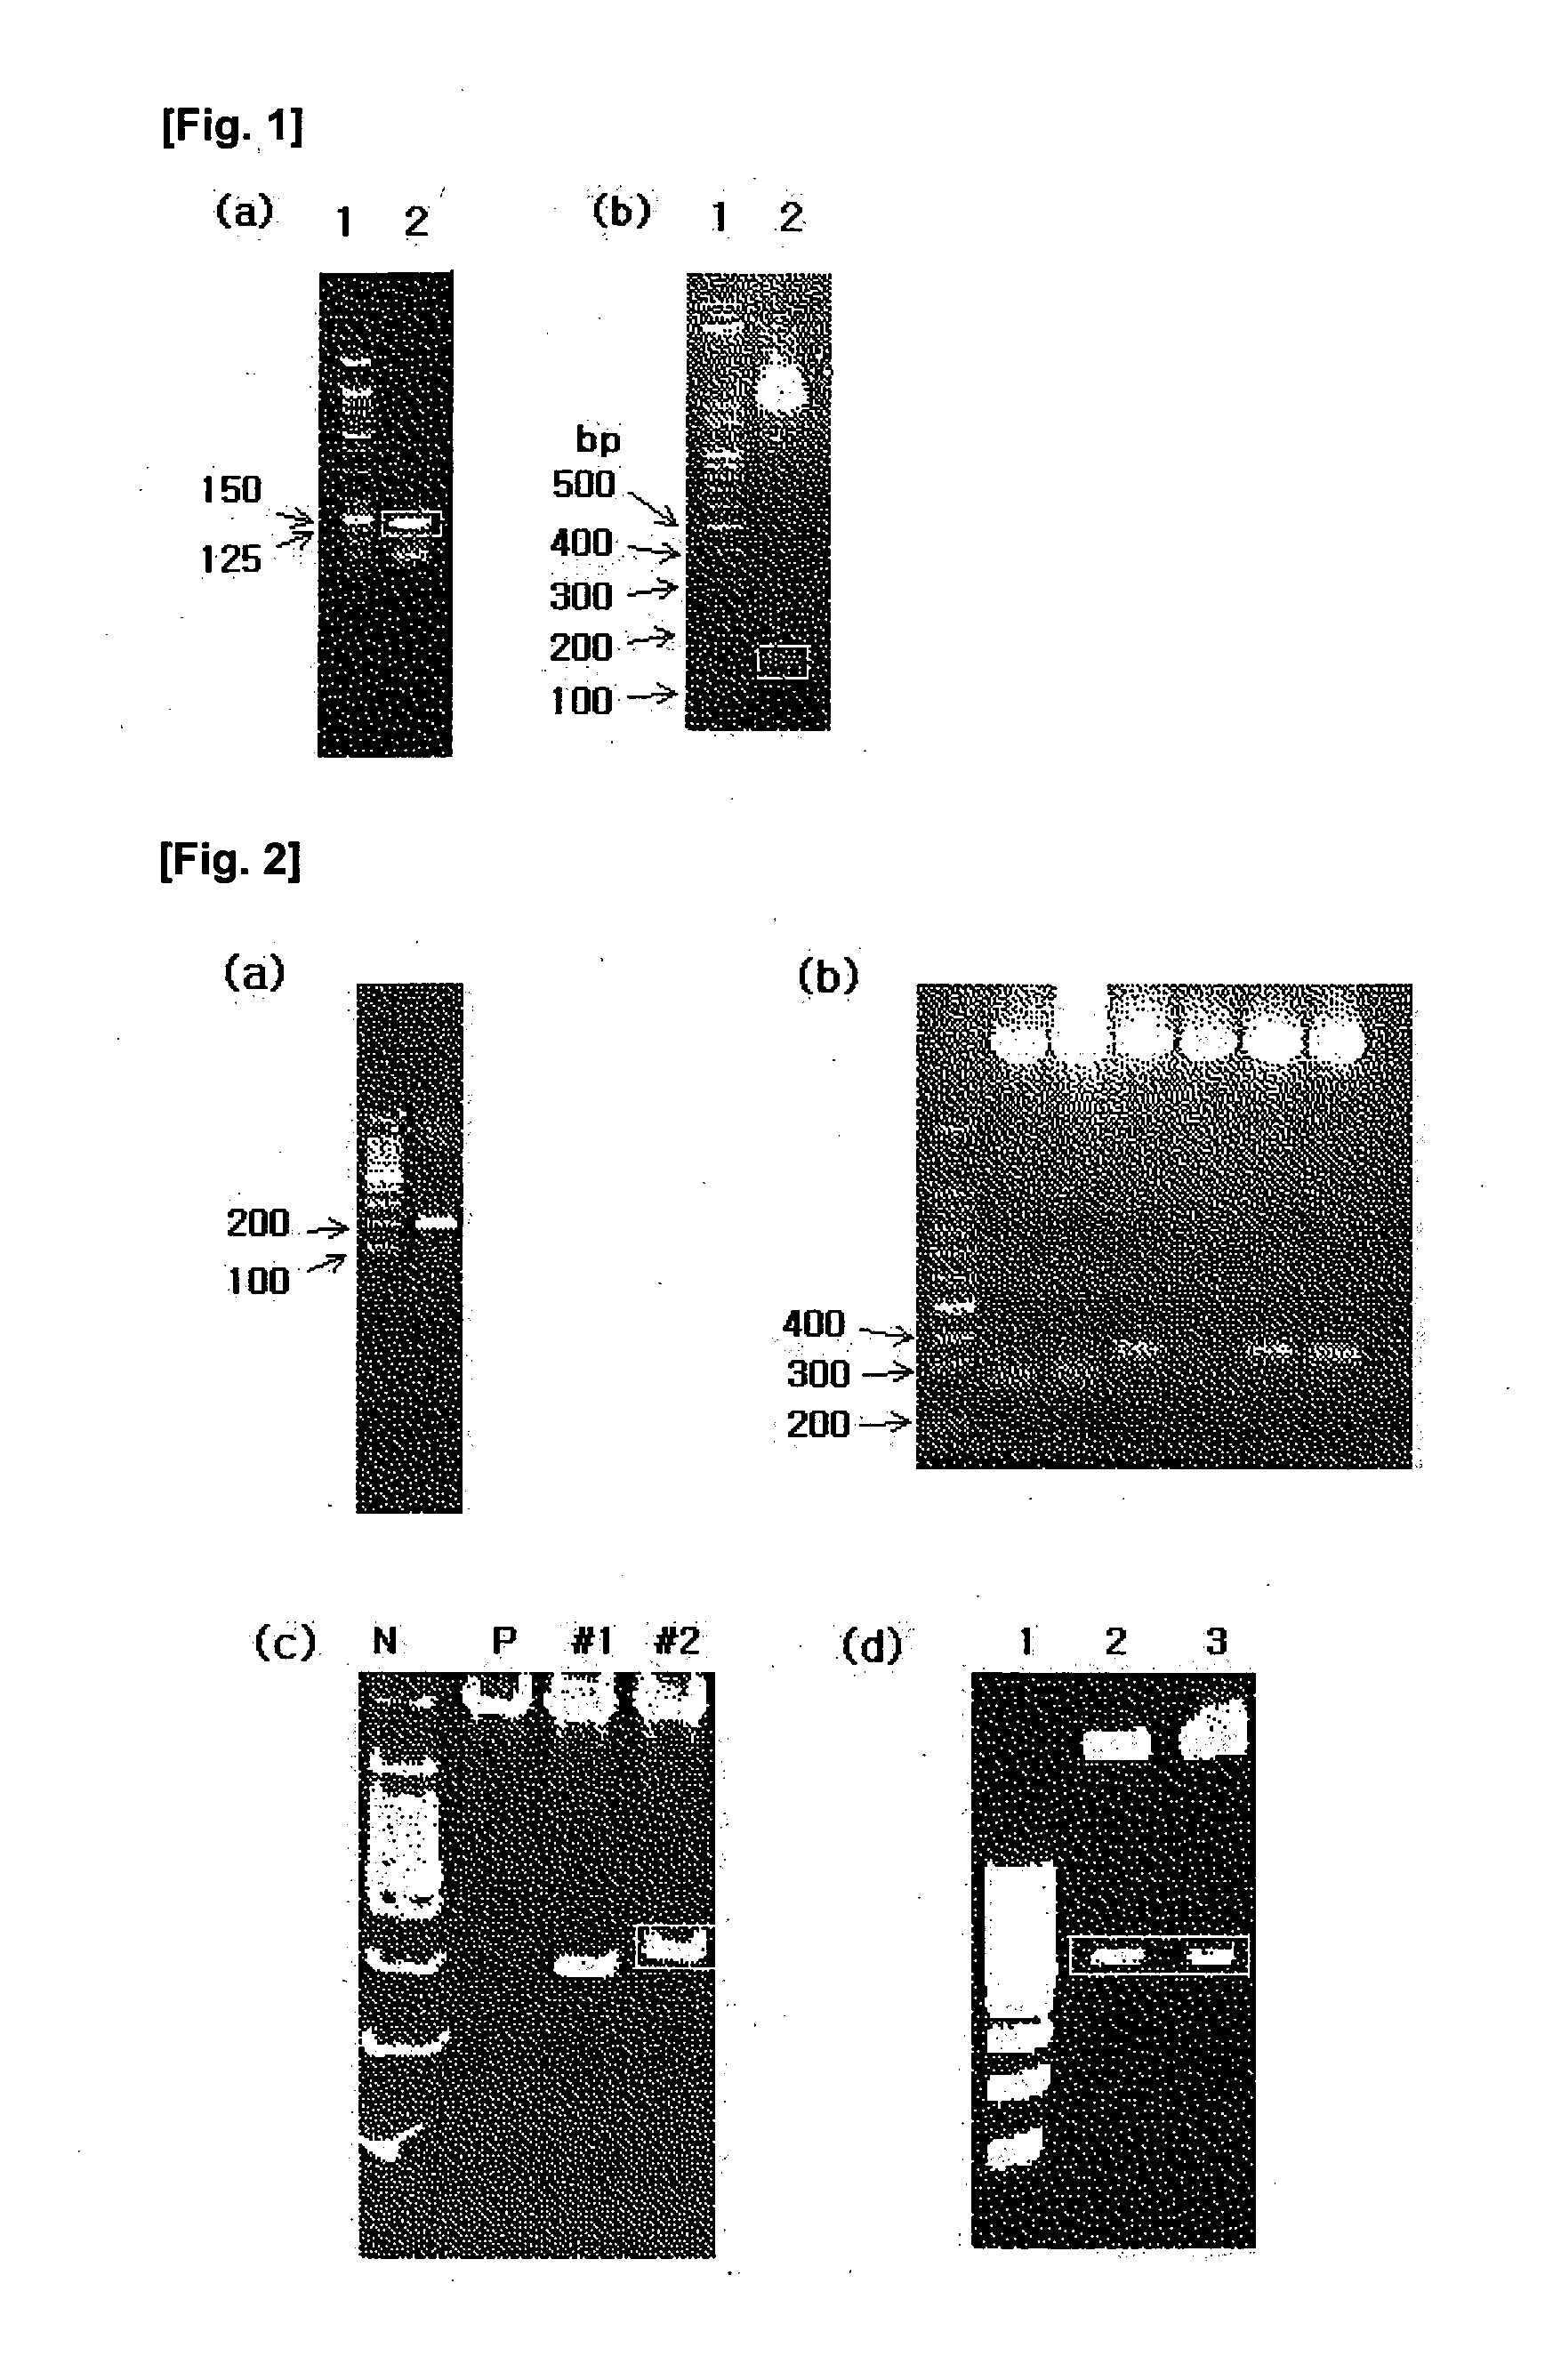 Anti-obese immunogenic hybrid polypeptides and Anti-obese vaccine composition comprising the same